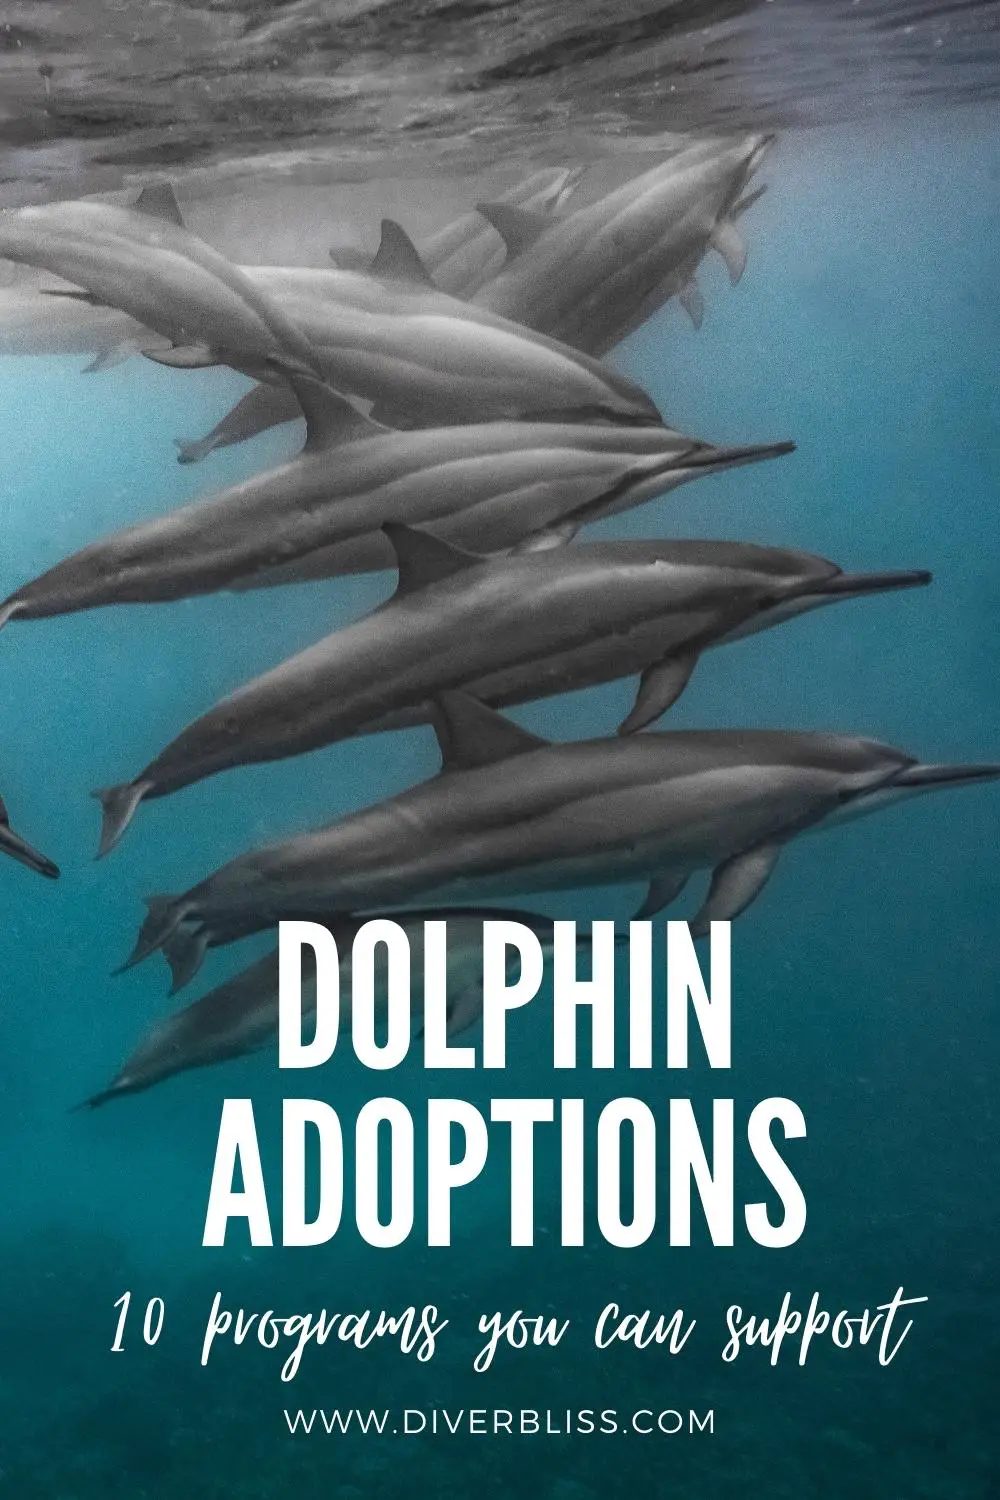 dolphin adoptions, 10 programs you can support